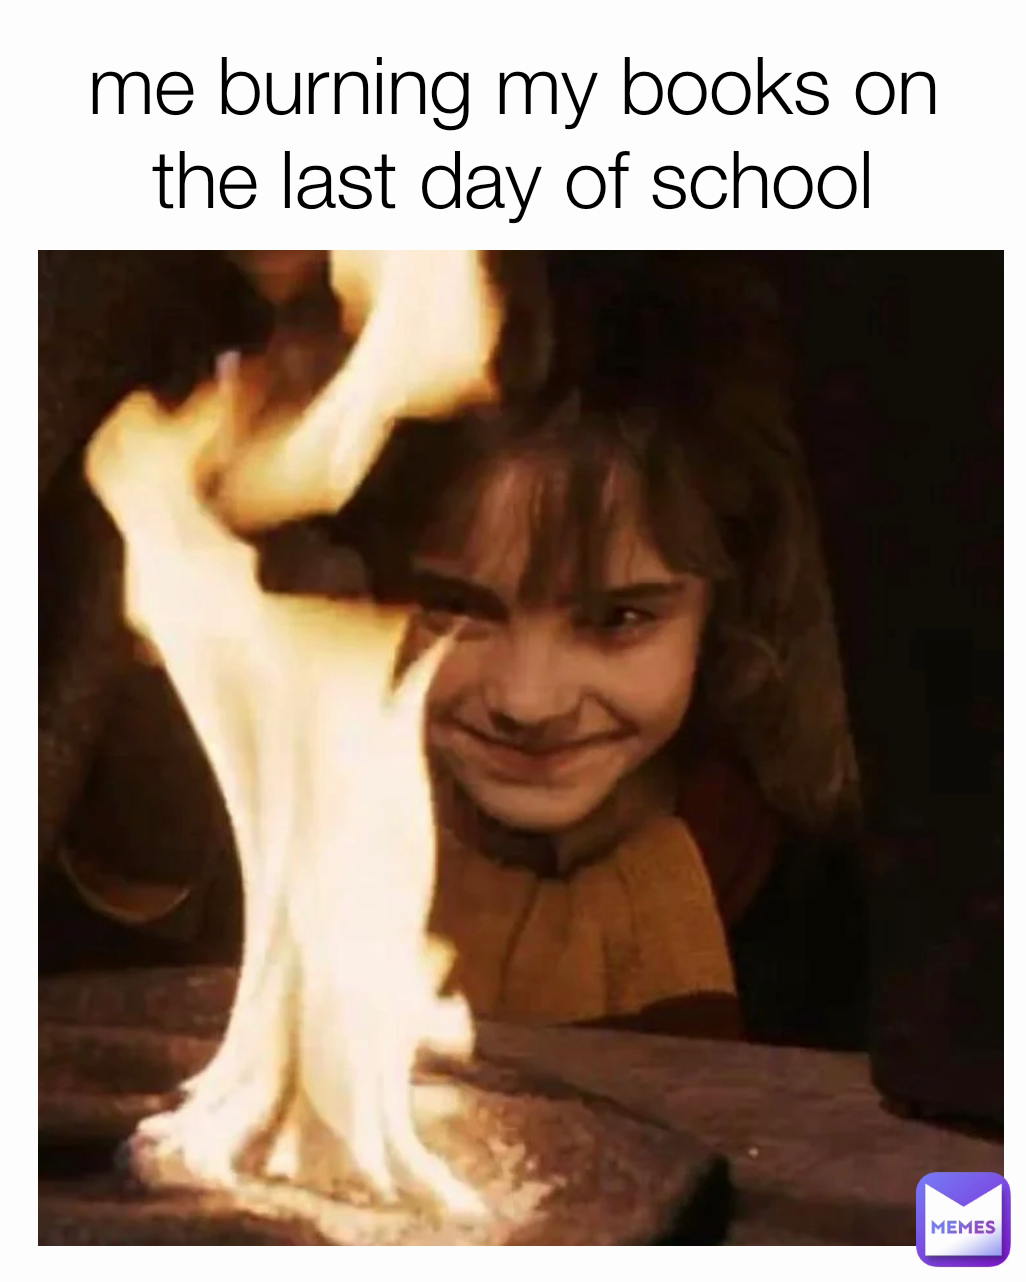 me burning my books on the last day of school